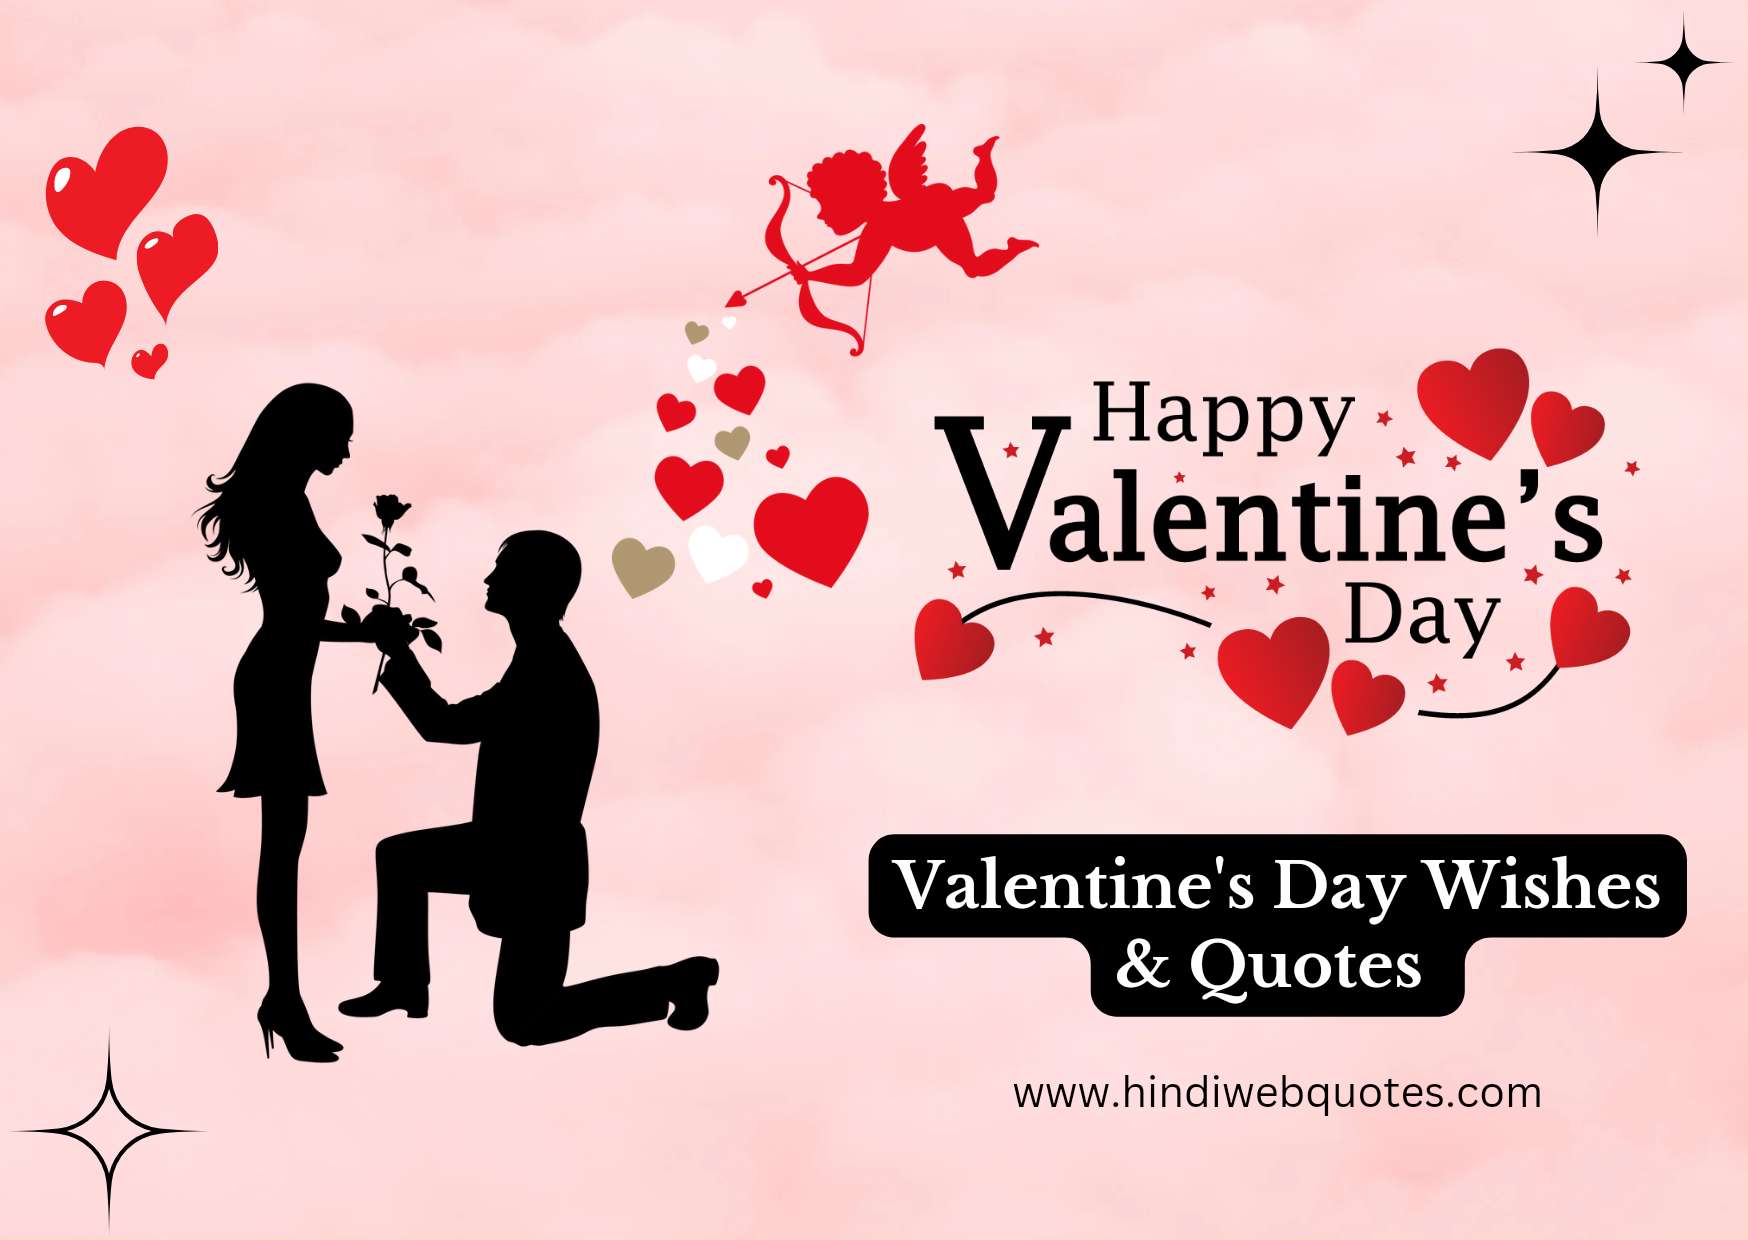 101+ Inspiring Valentine's Day Wishes & Quotes To Make Your Special ...